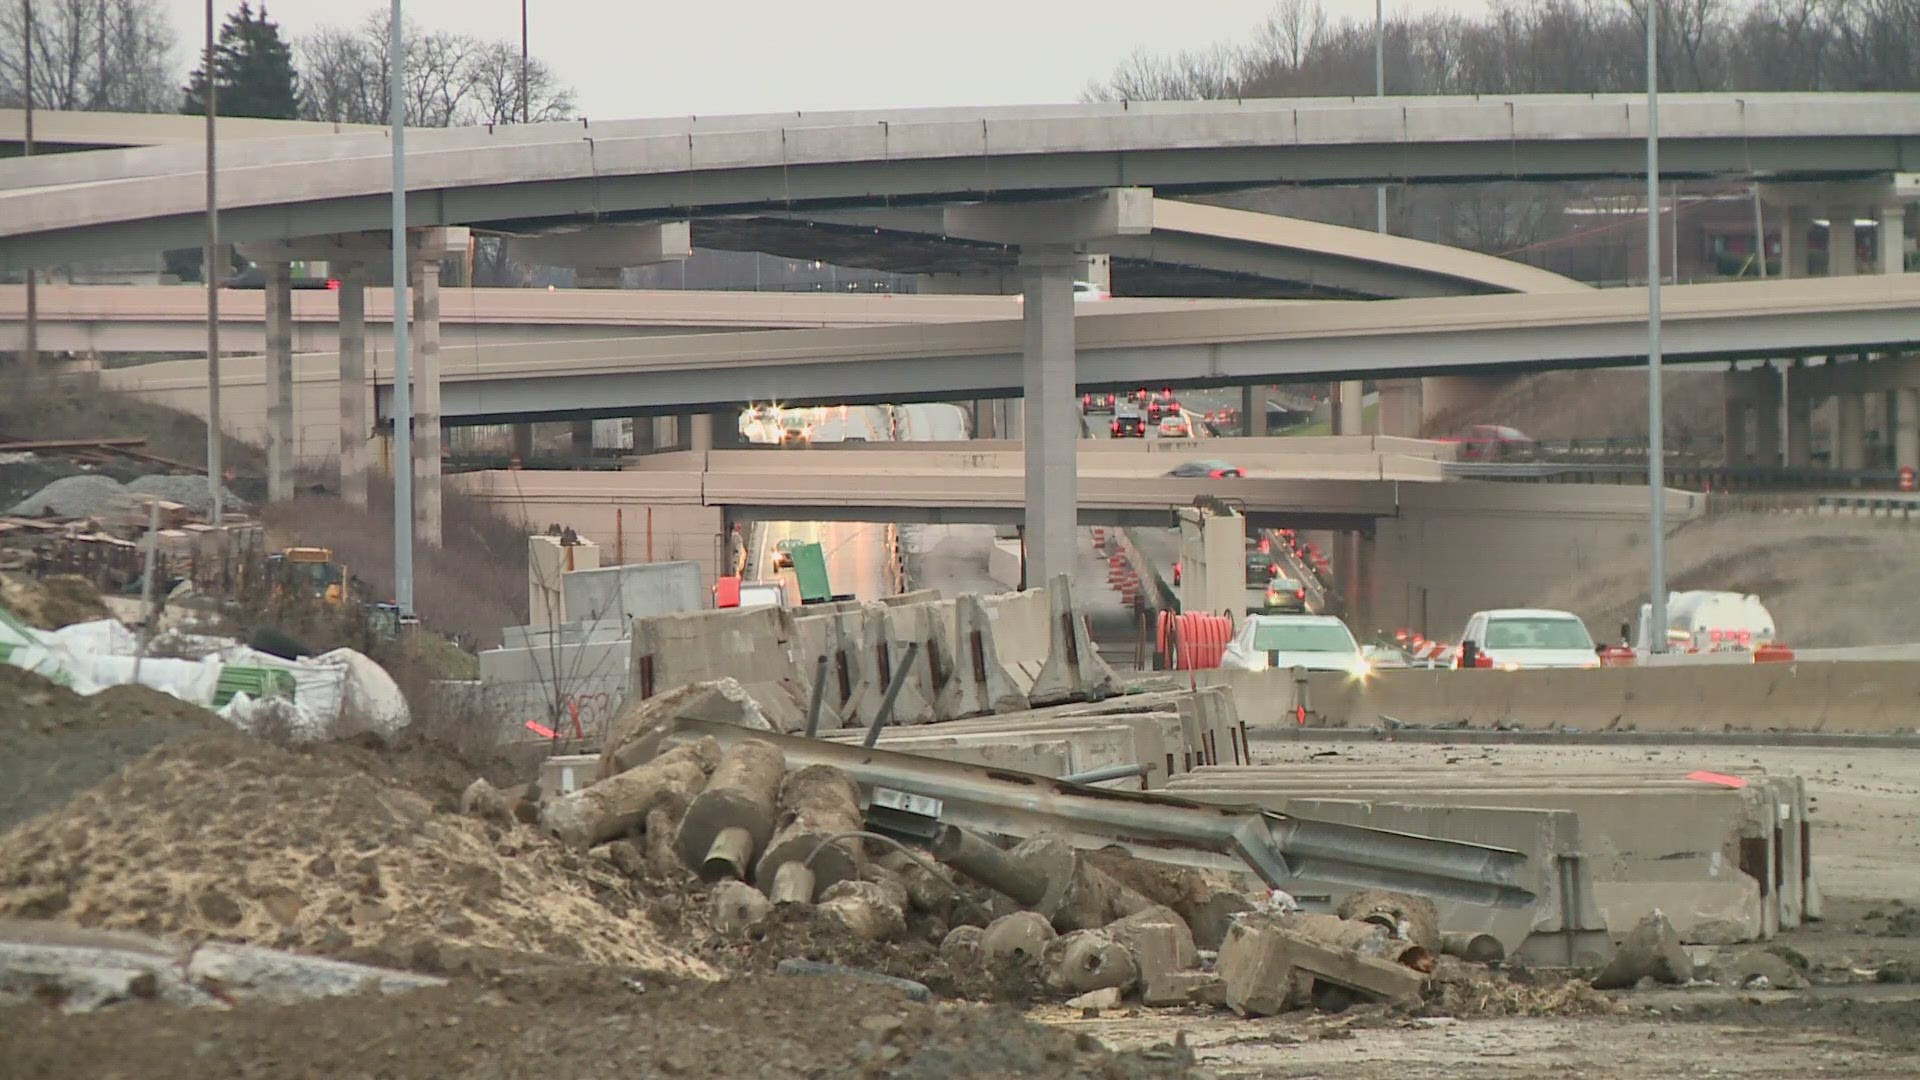 ODOT says the plan would address congestion and safety issues on Route 8 just before the central interchange.